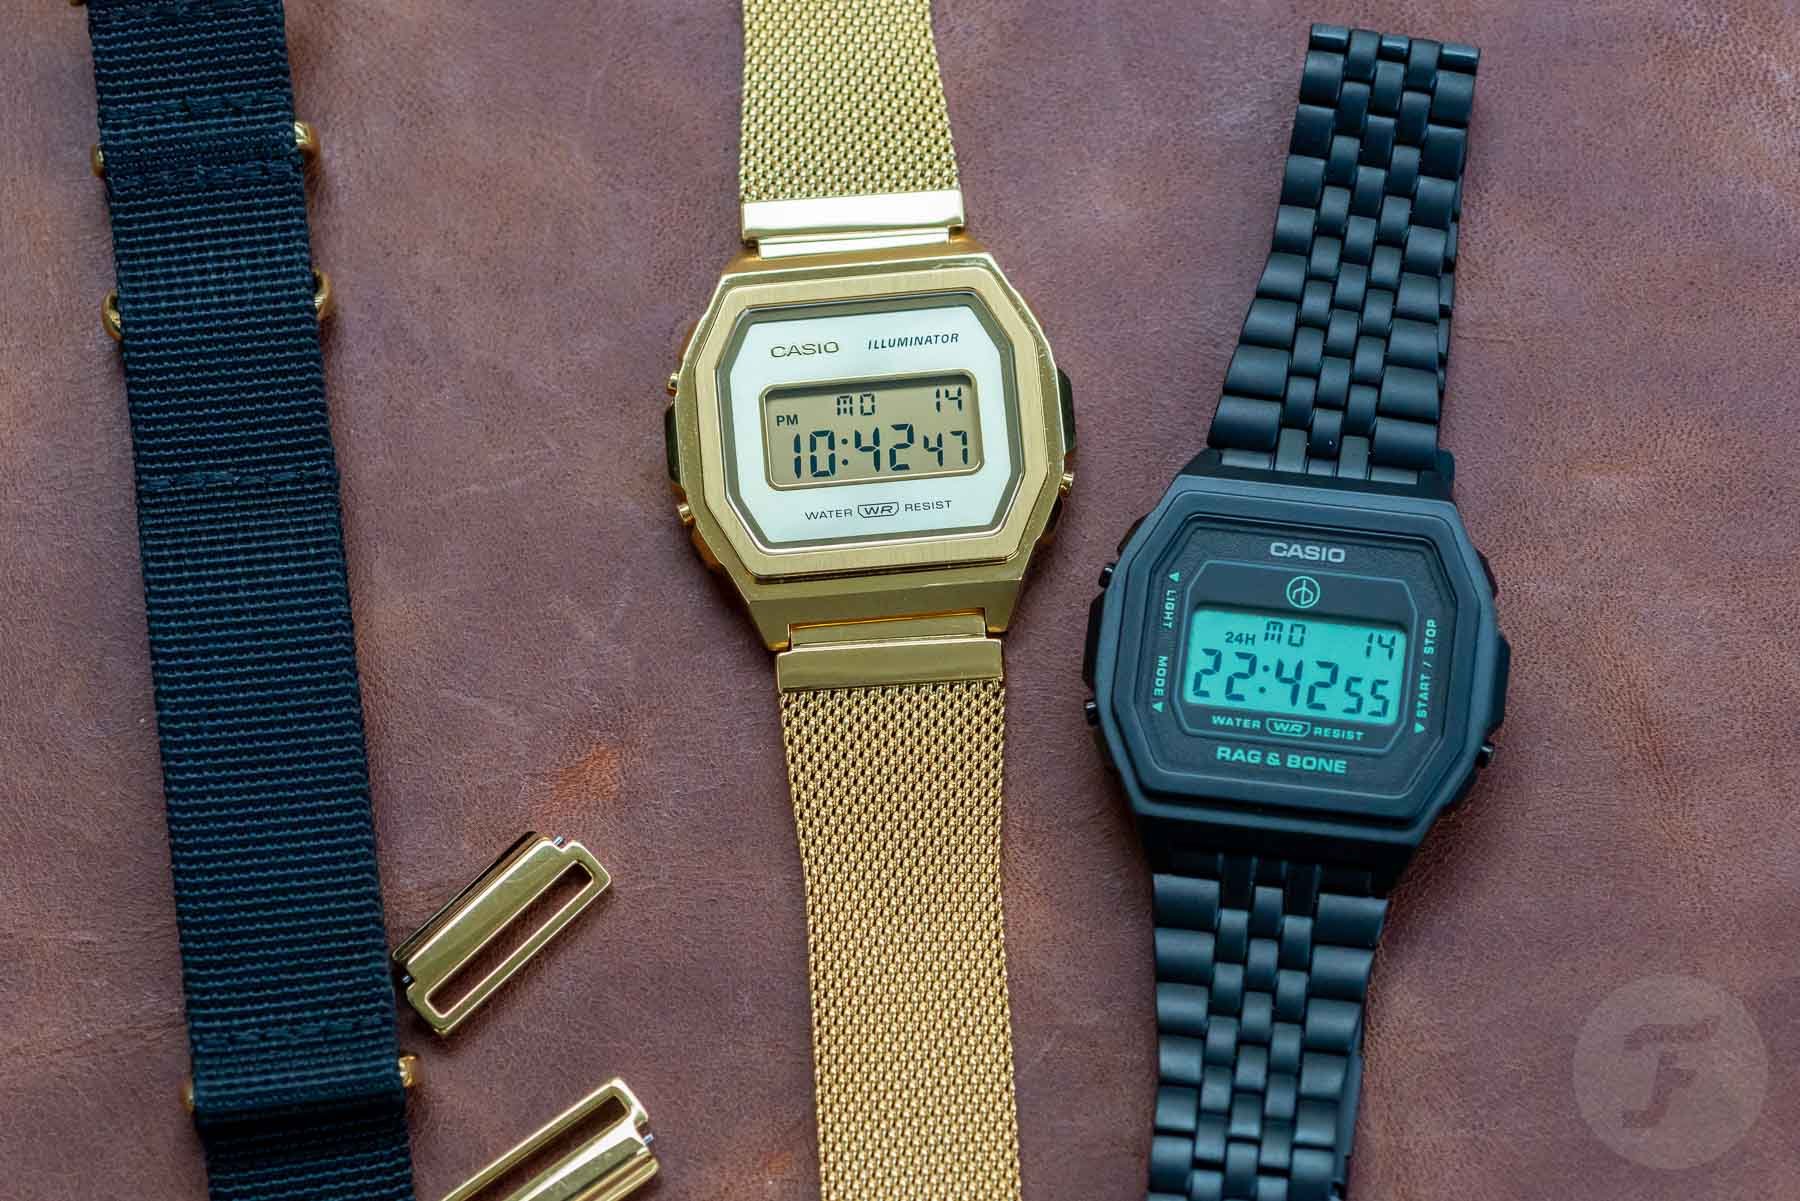 【F】 Hands-On: Two New Casio A1000 Models